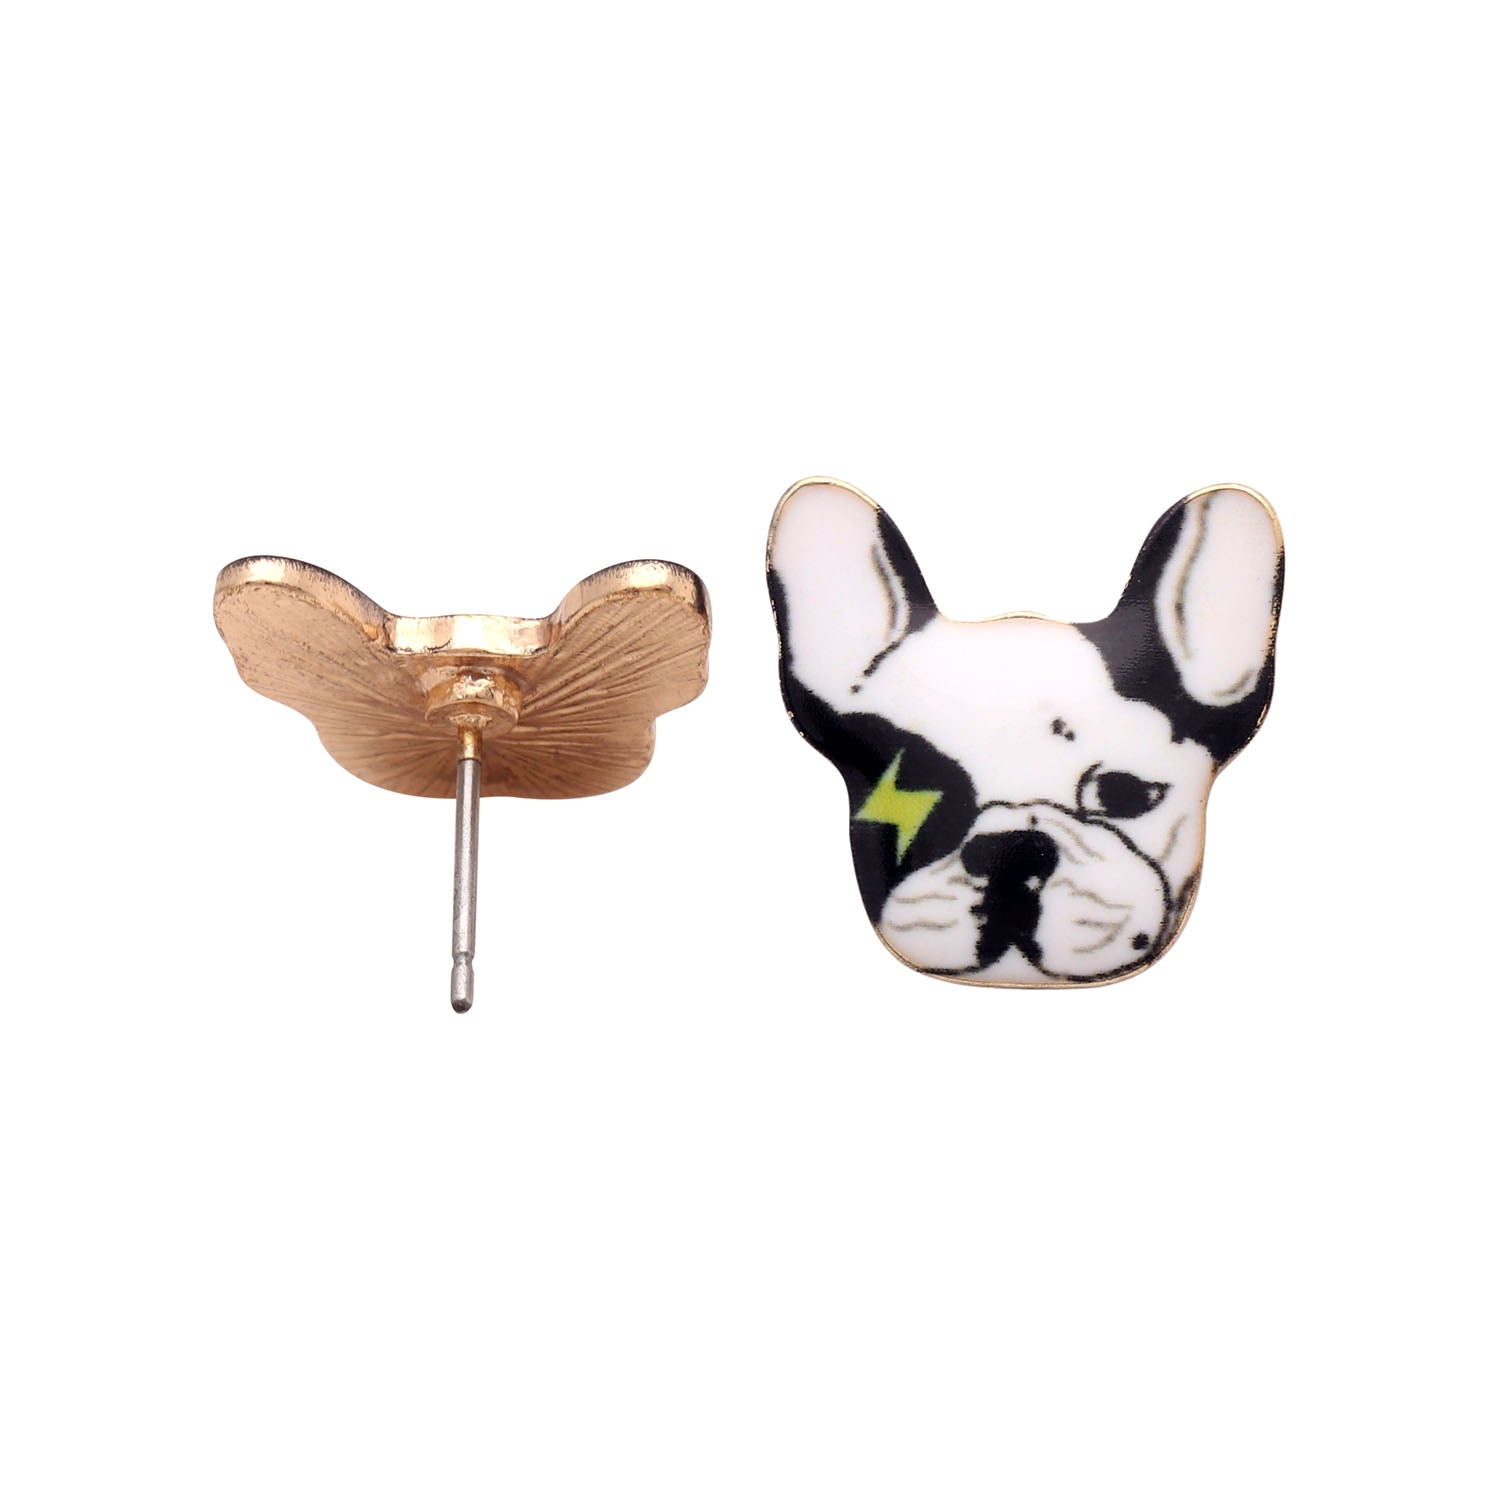 French Bulldog Boston Terrier Stud Earrings Enamel Colorful From the Ginger Lyne Collection - Style 4